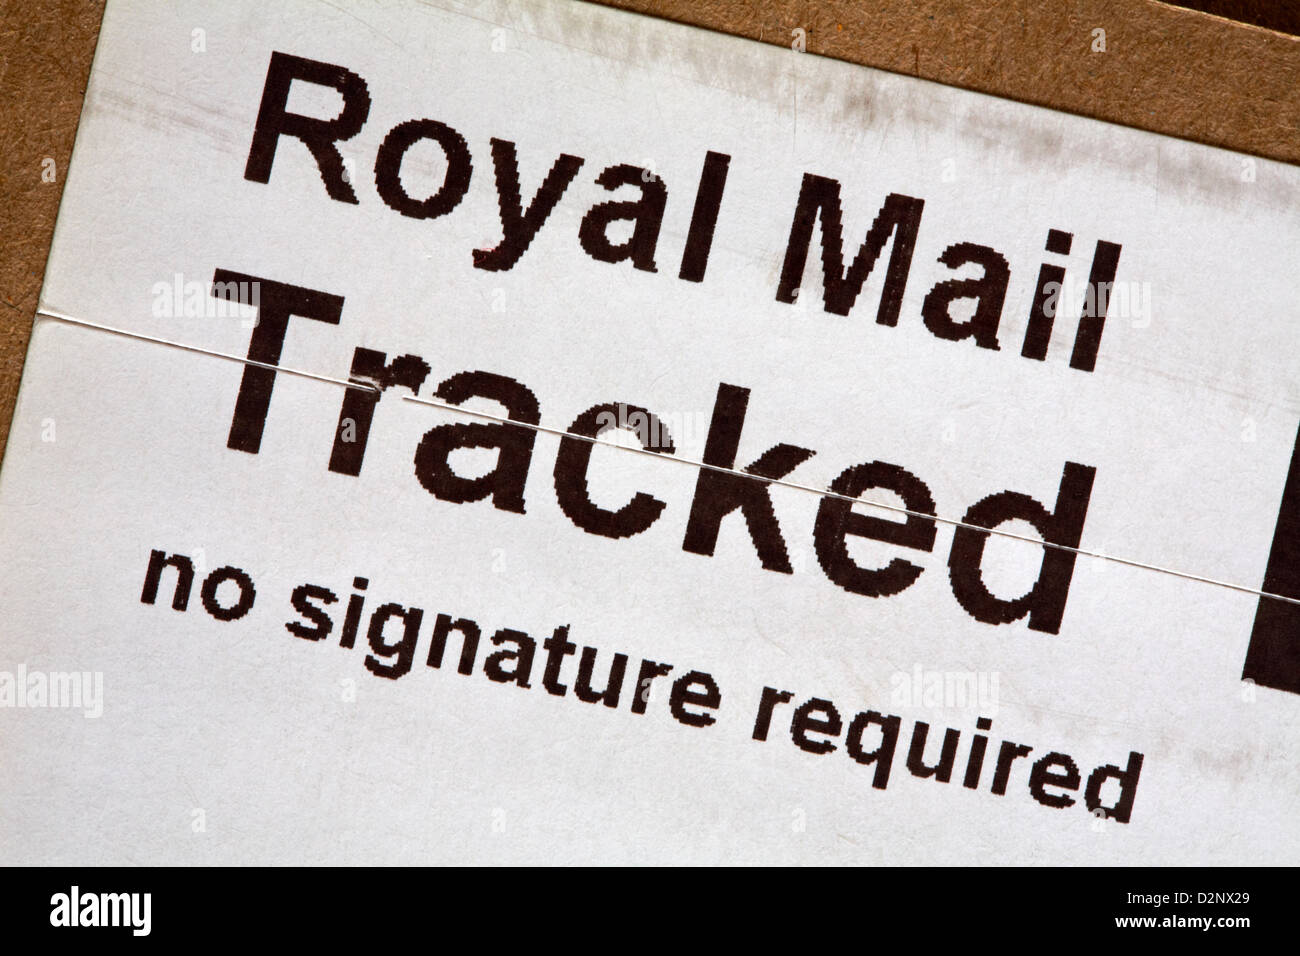 Royal Mail tracked no signature required label on parcel Stock Photo